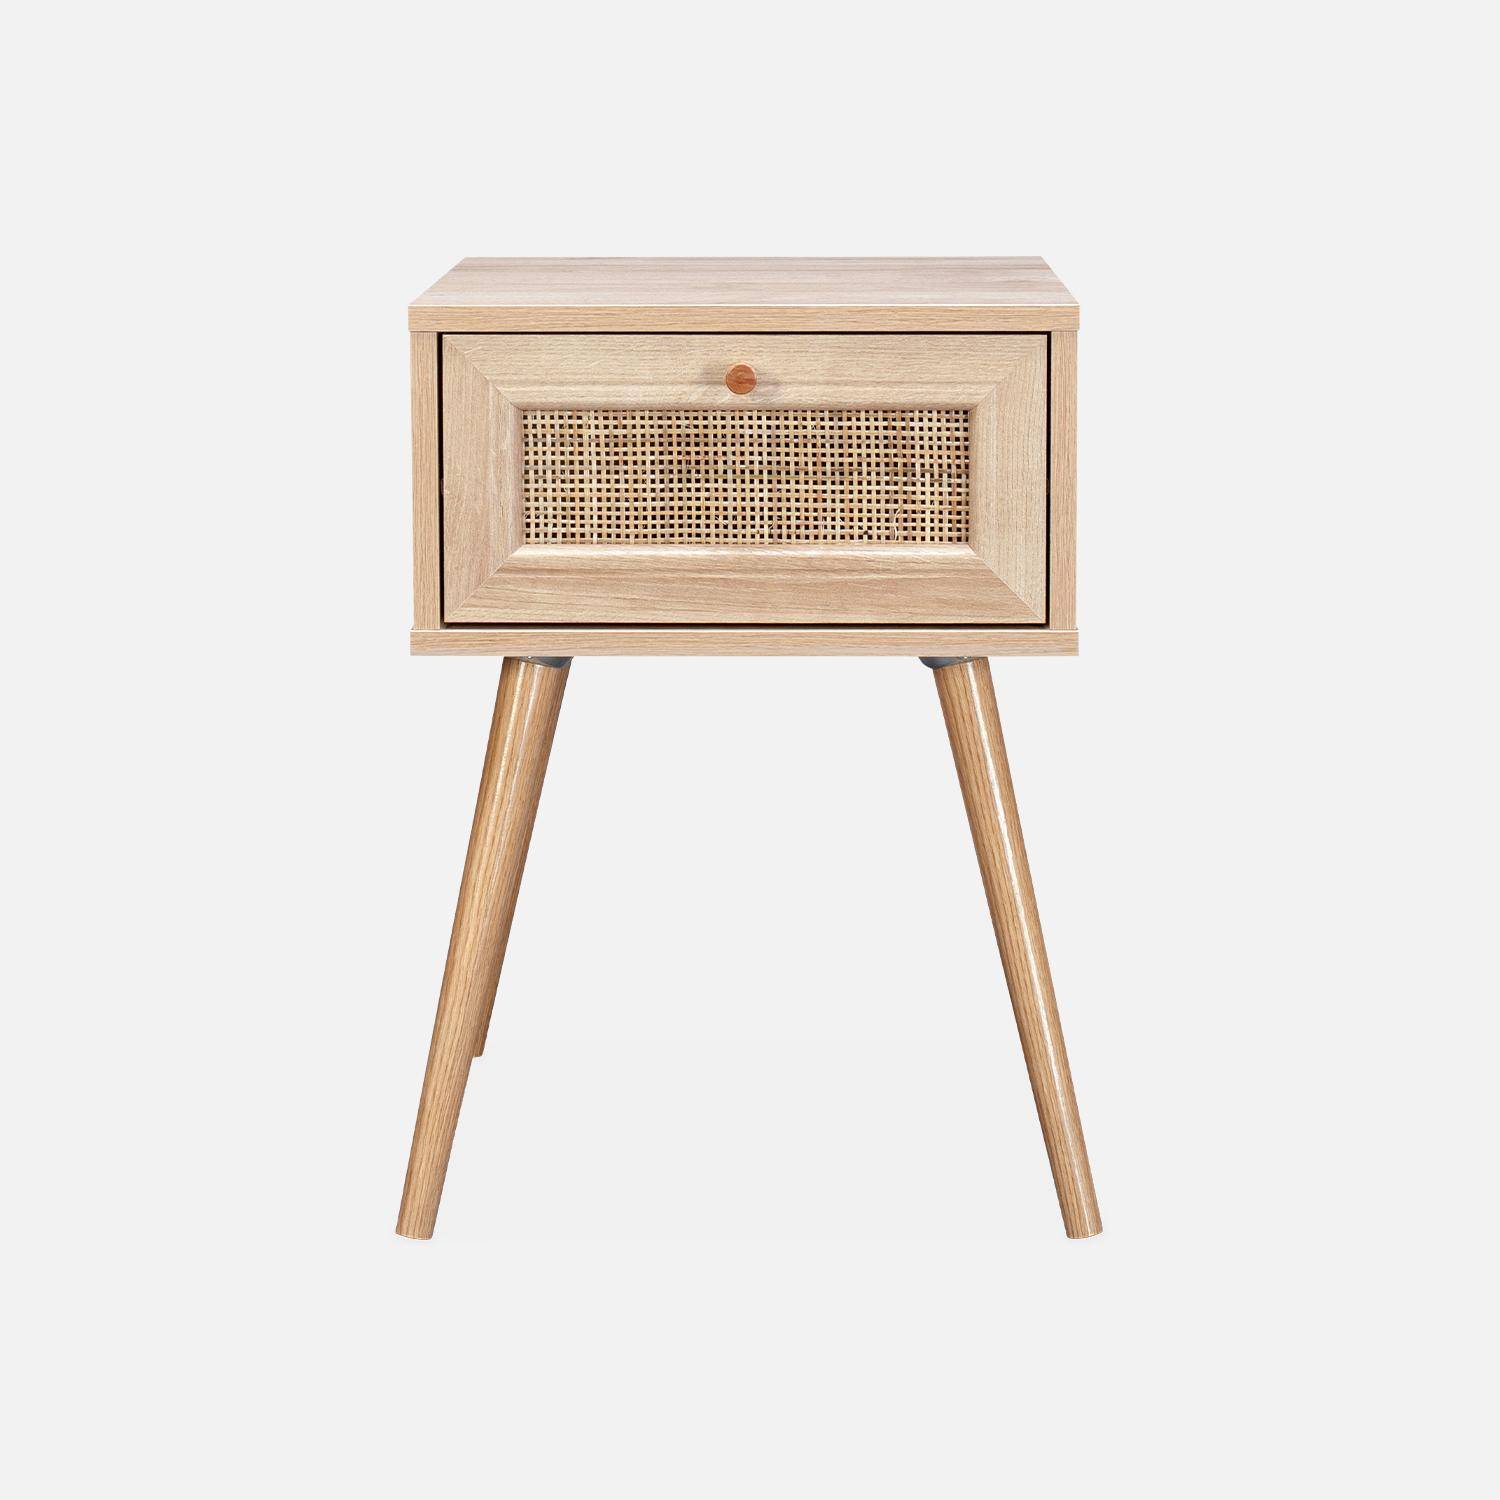 Woven rattan bedside table with drawer, 39x39x55.4cm - Boheme - Natural Wood colour Photo4